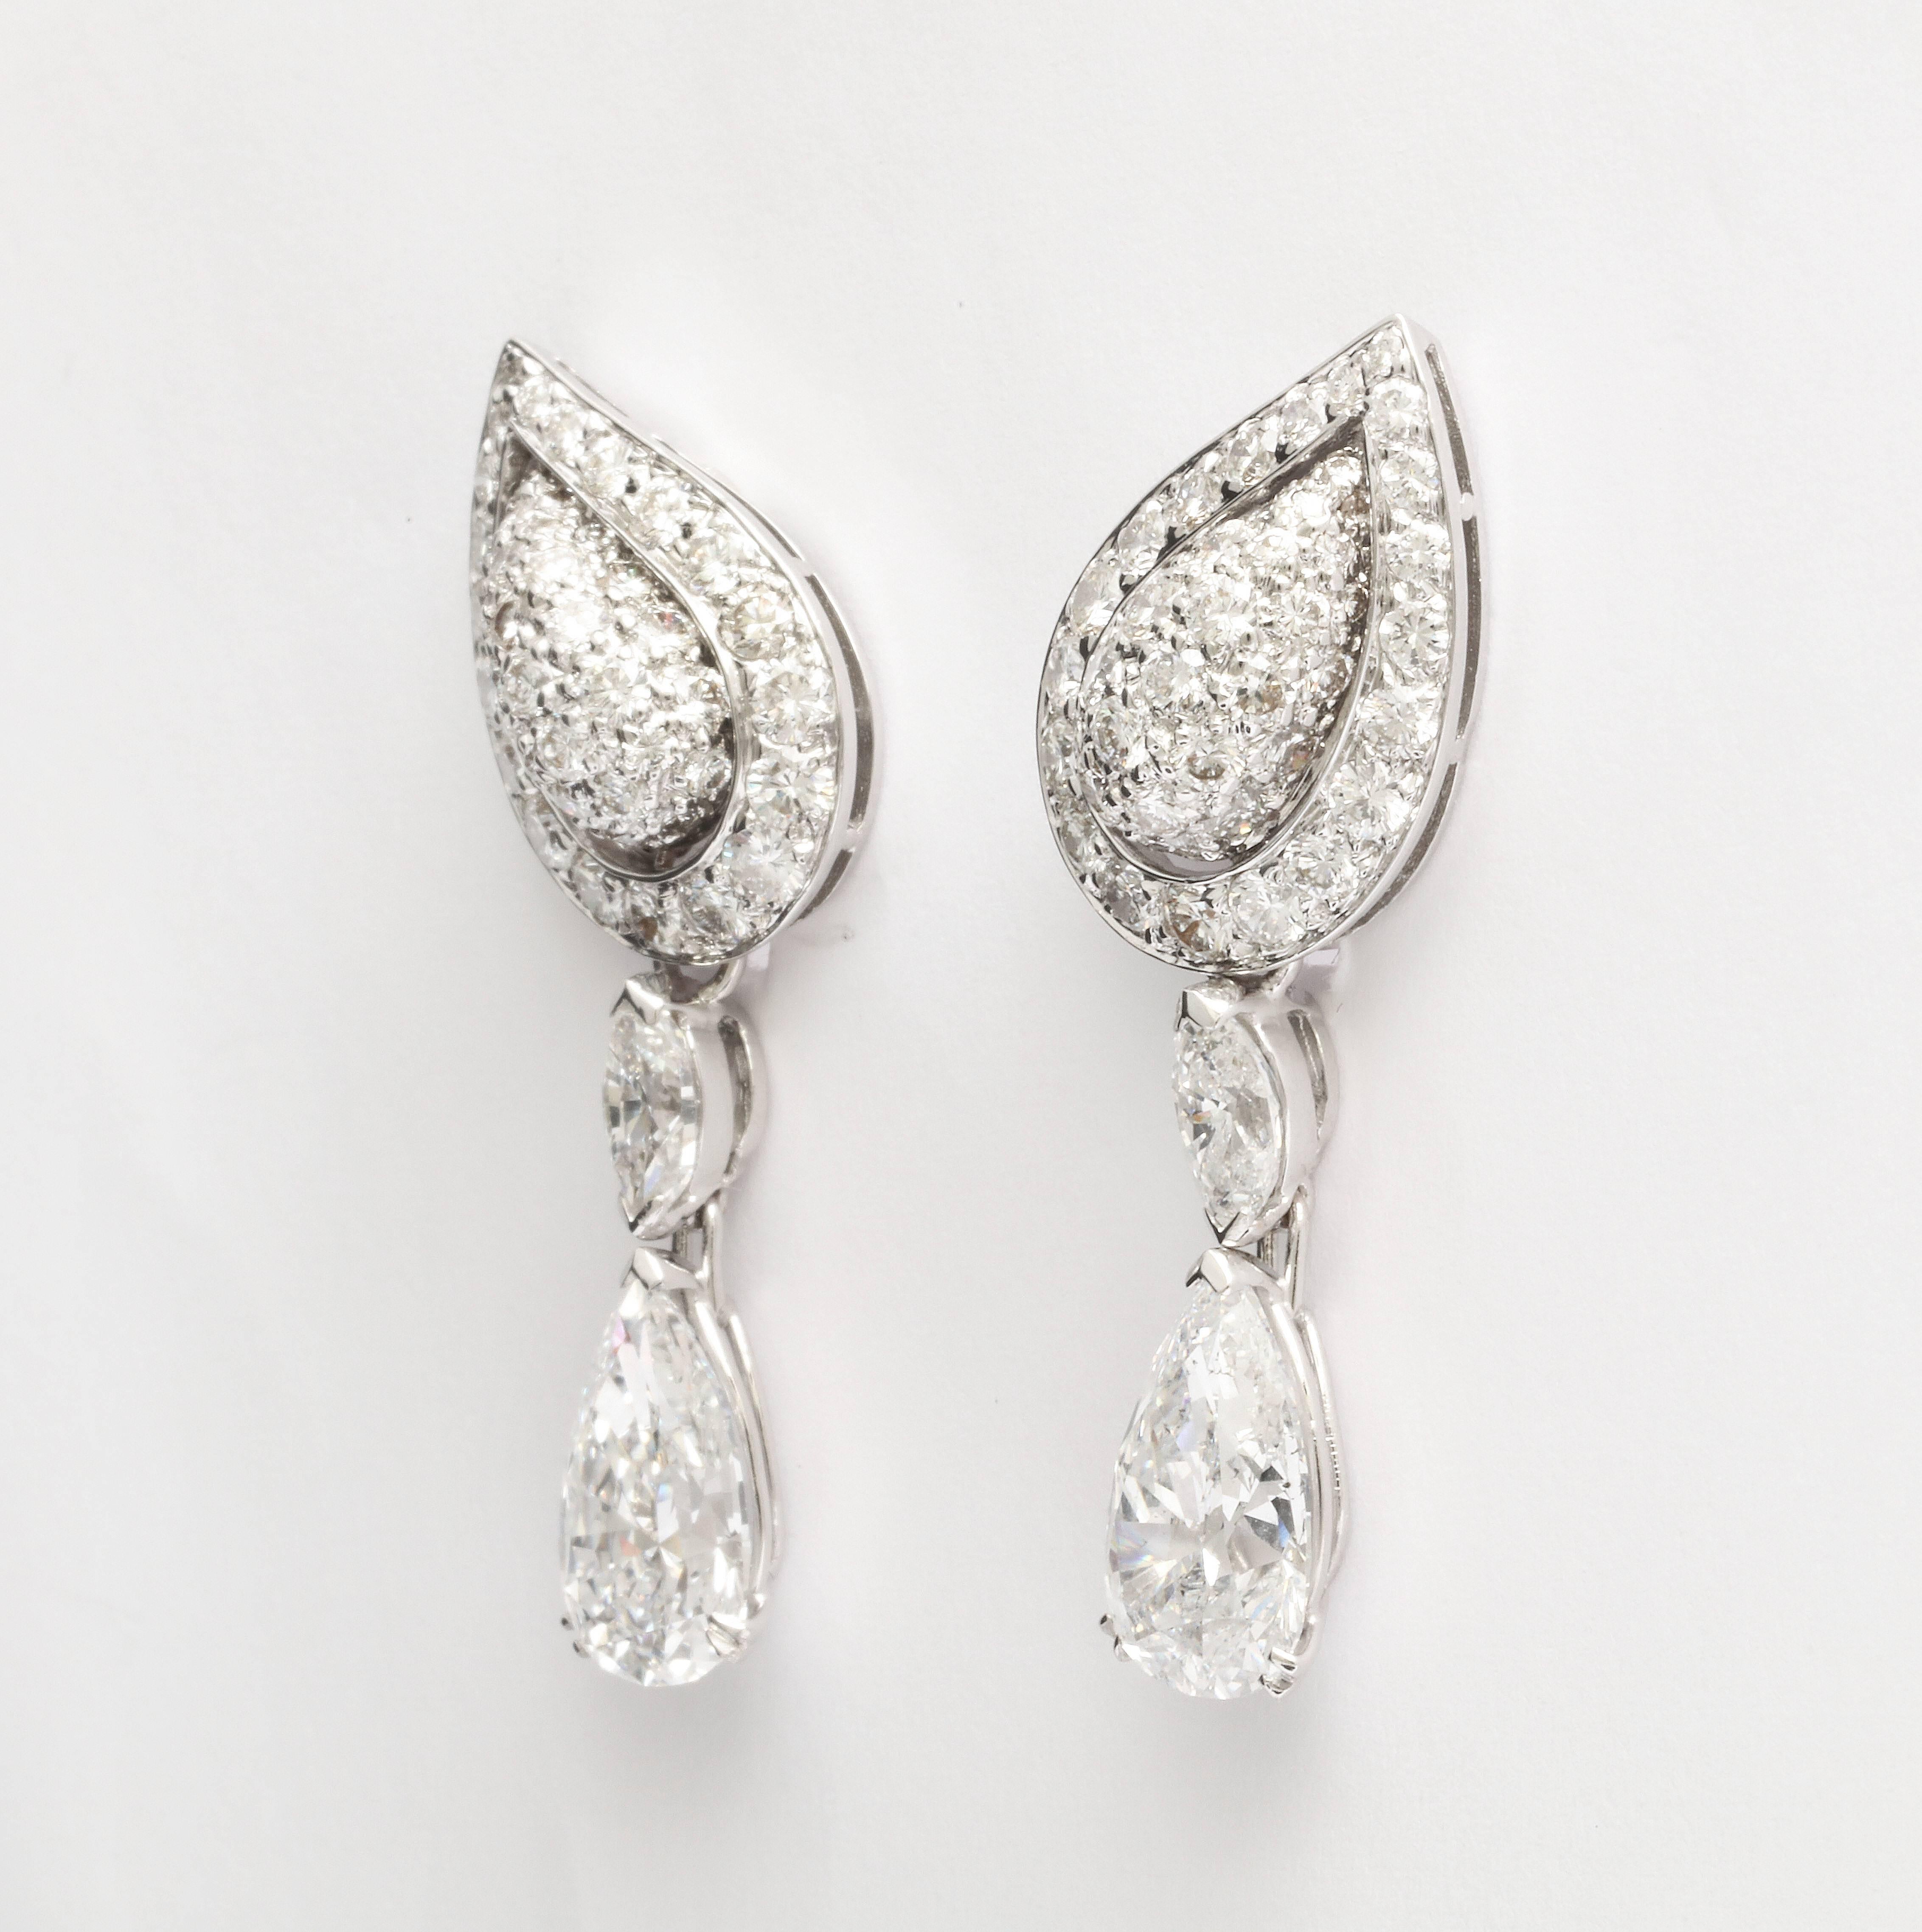 18kt white gold and diamond earclips, by Cartier made in France.
2 pear shape diamond drops weigh a total of app. 4.67cts.
